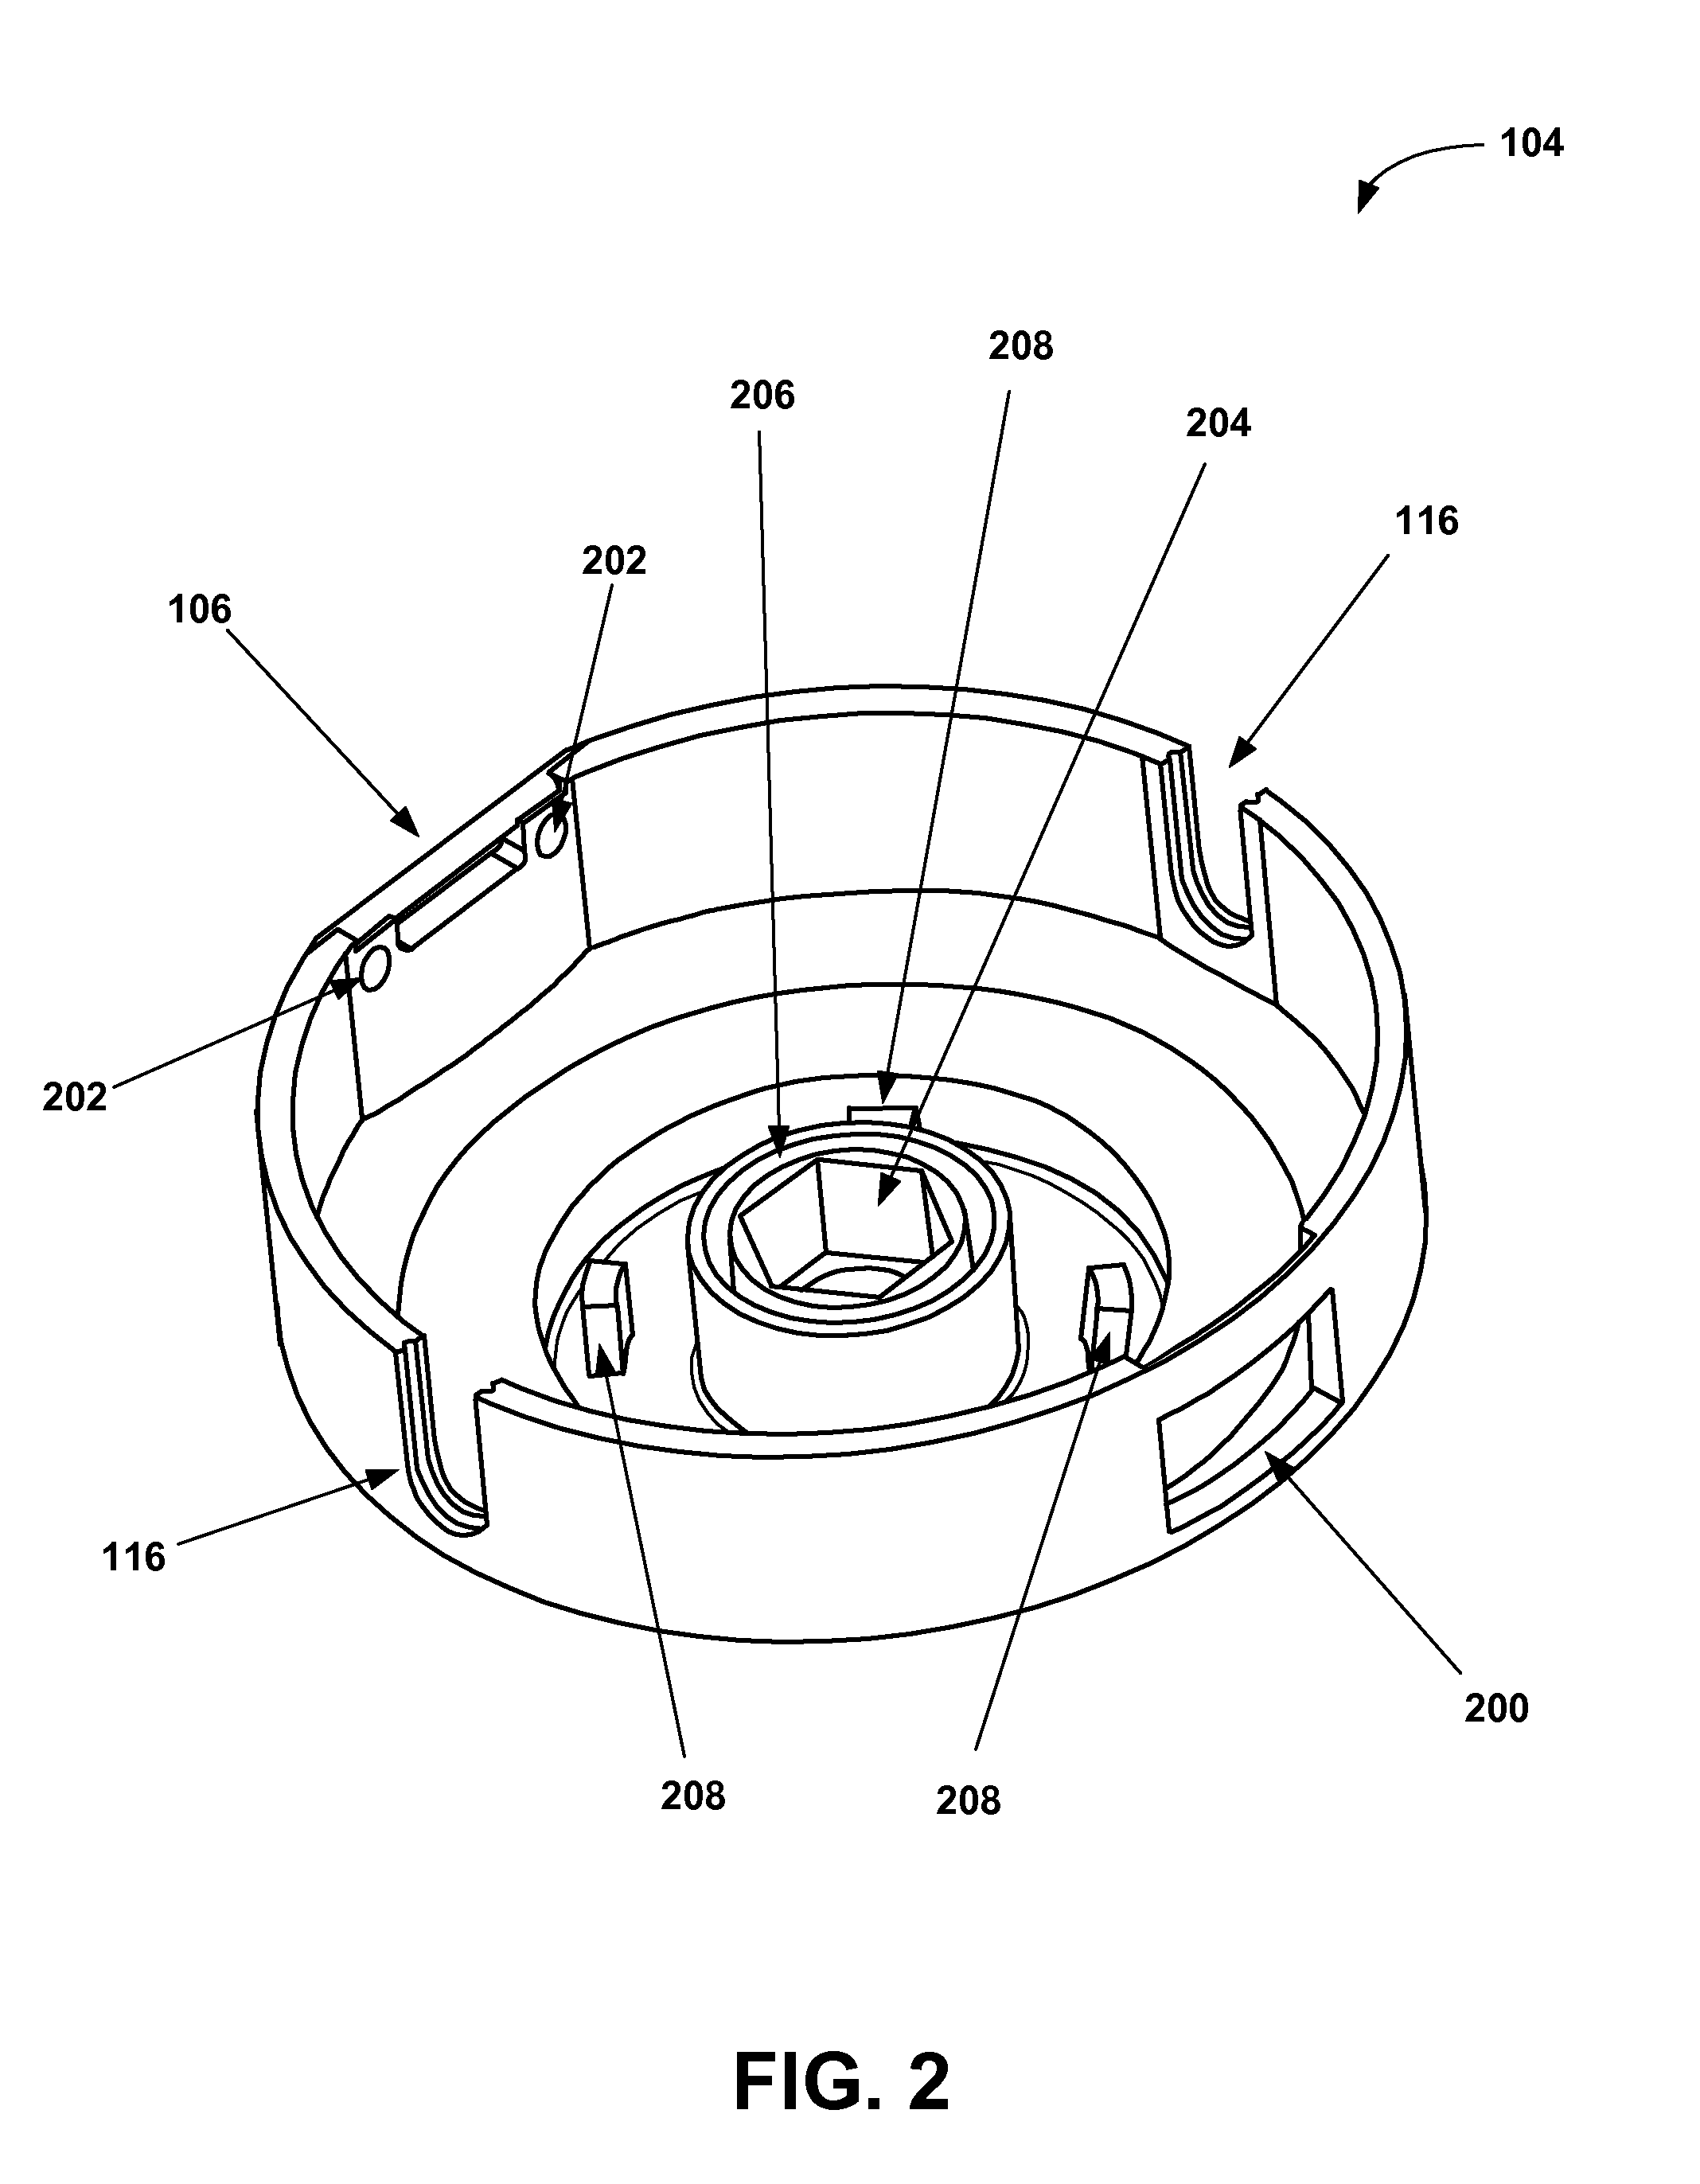 Trimmer head having a hinged housing for use in flexible line rotary trimmers systems